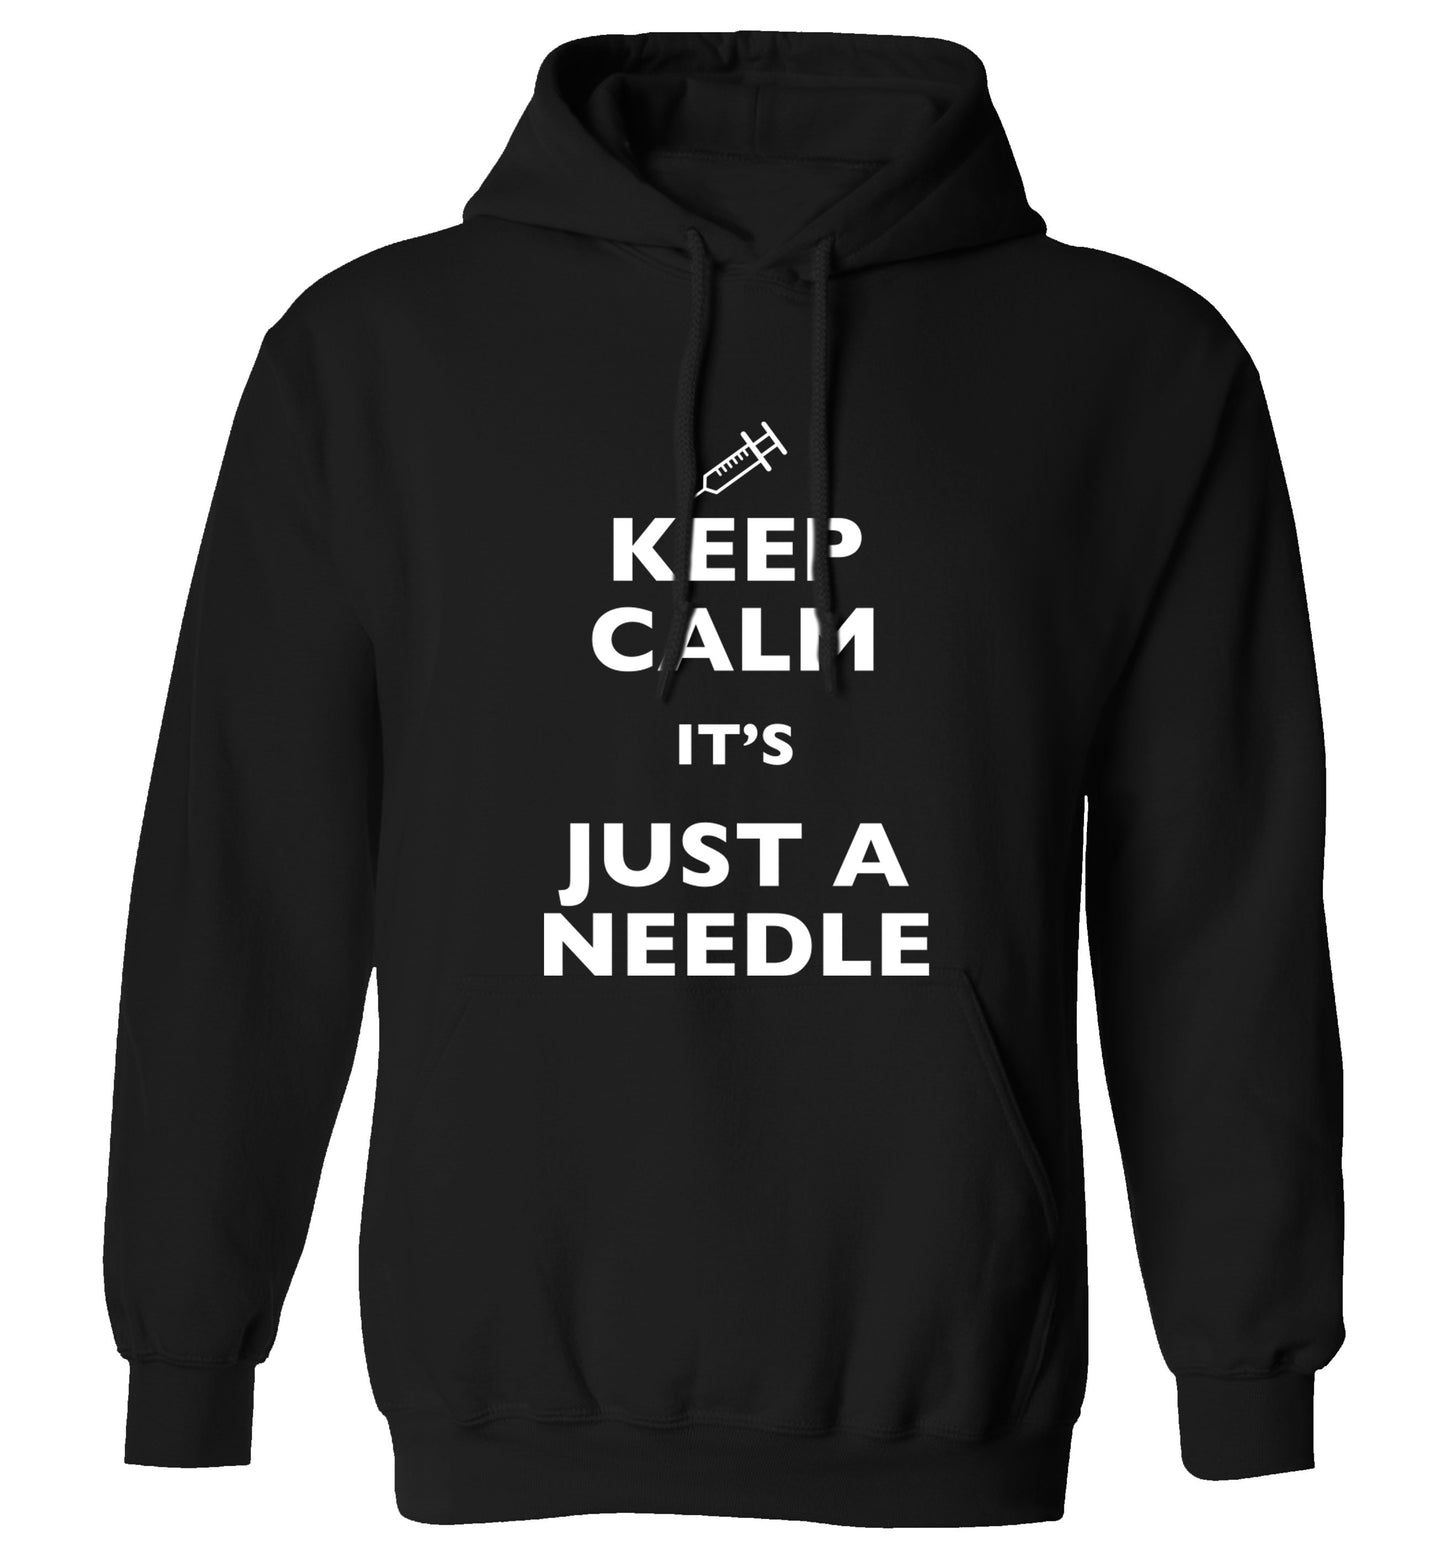 Keep calm it's only a needle adults unisex black hoodie 2XL